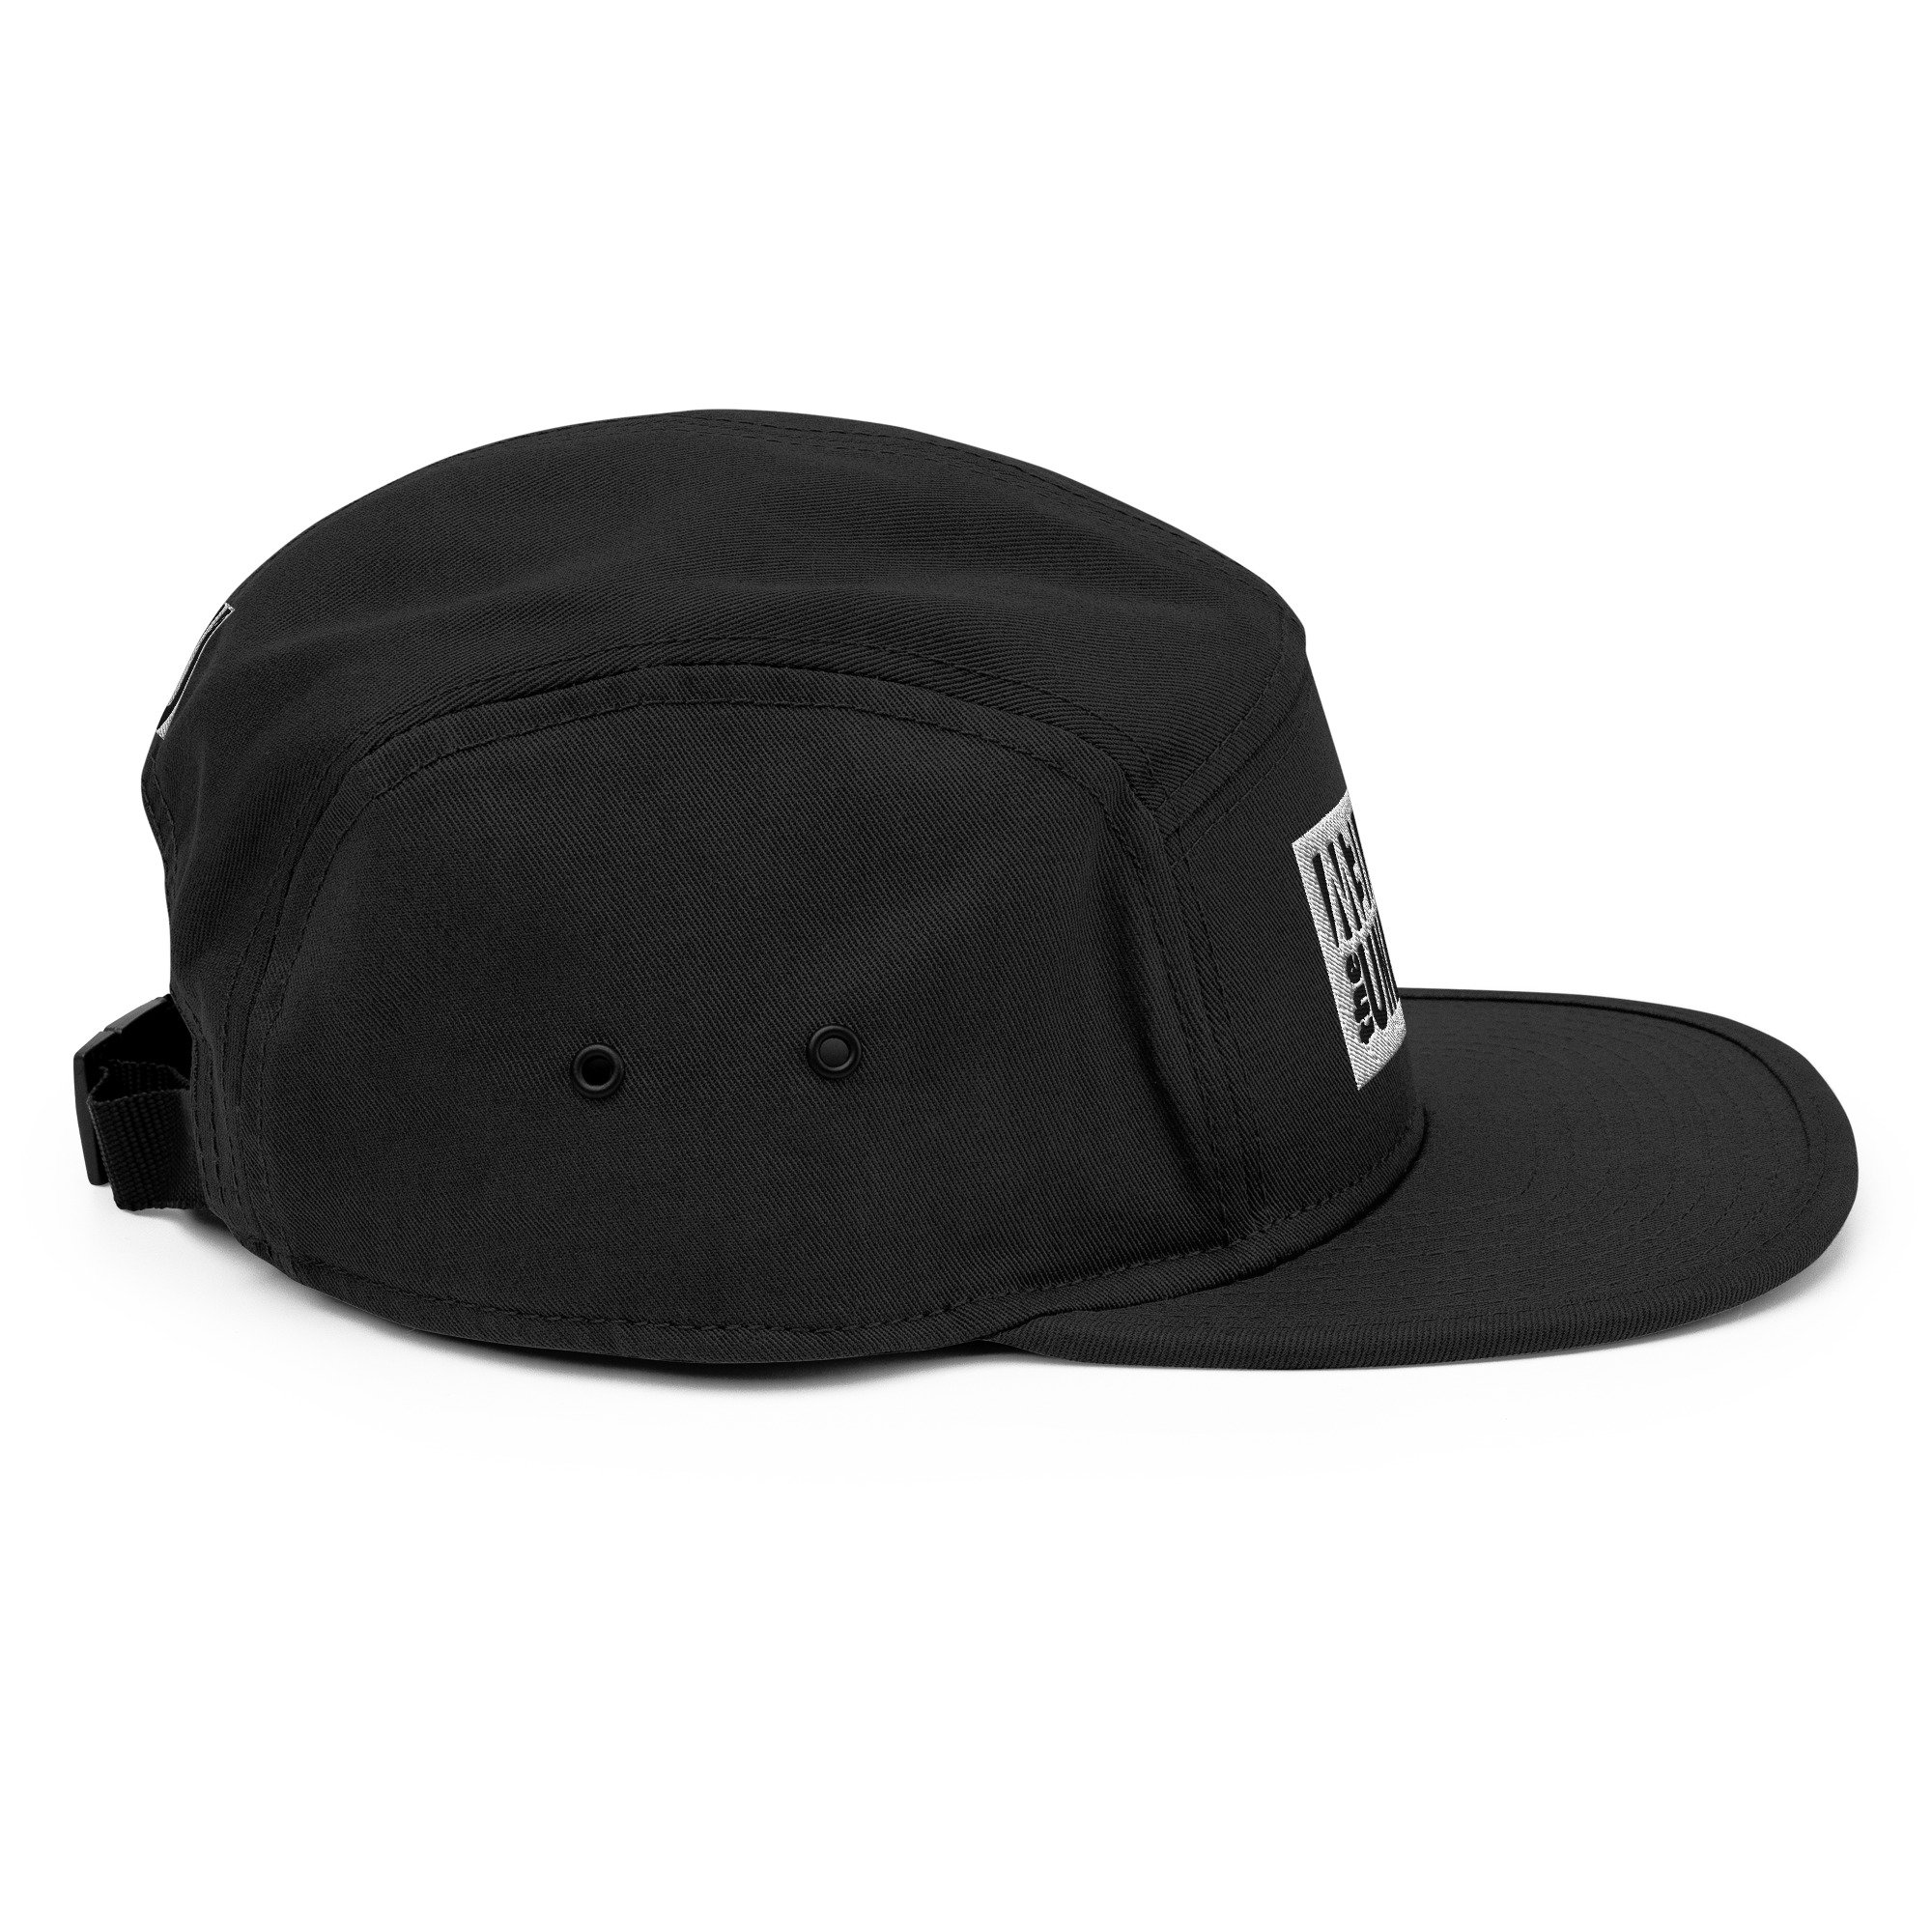 Stacked tUR Logo 5 Panel Camper — The Under Review